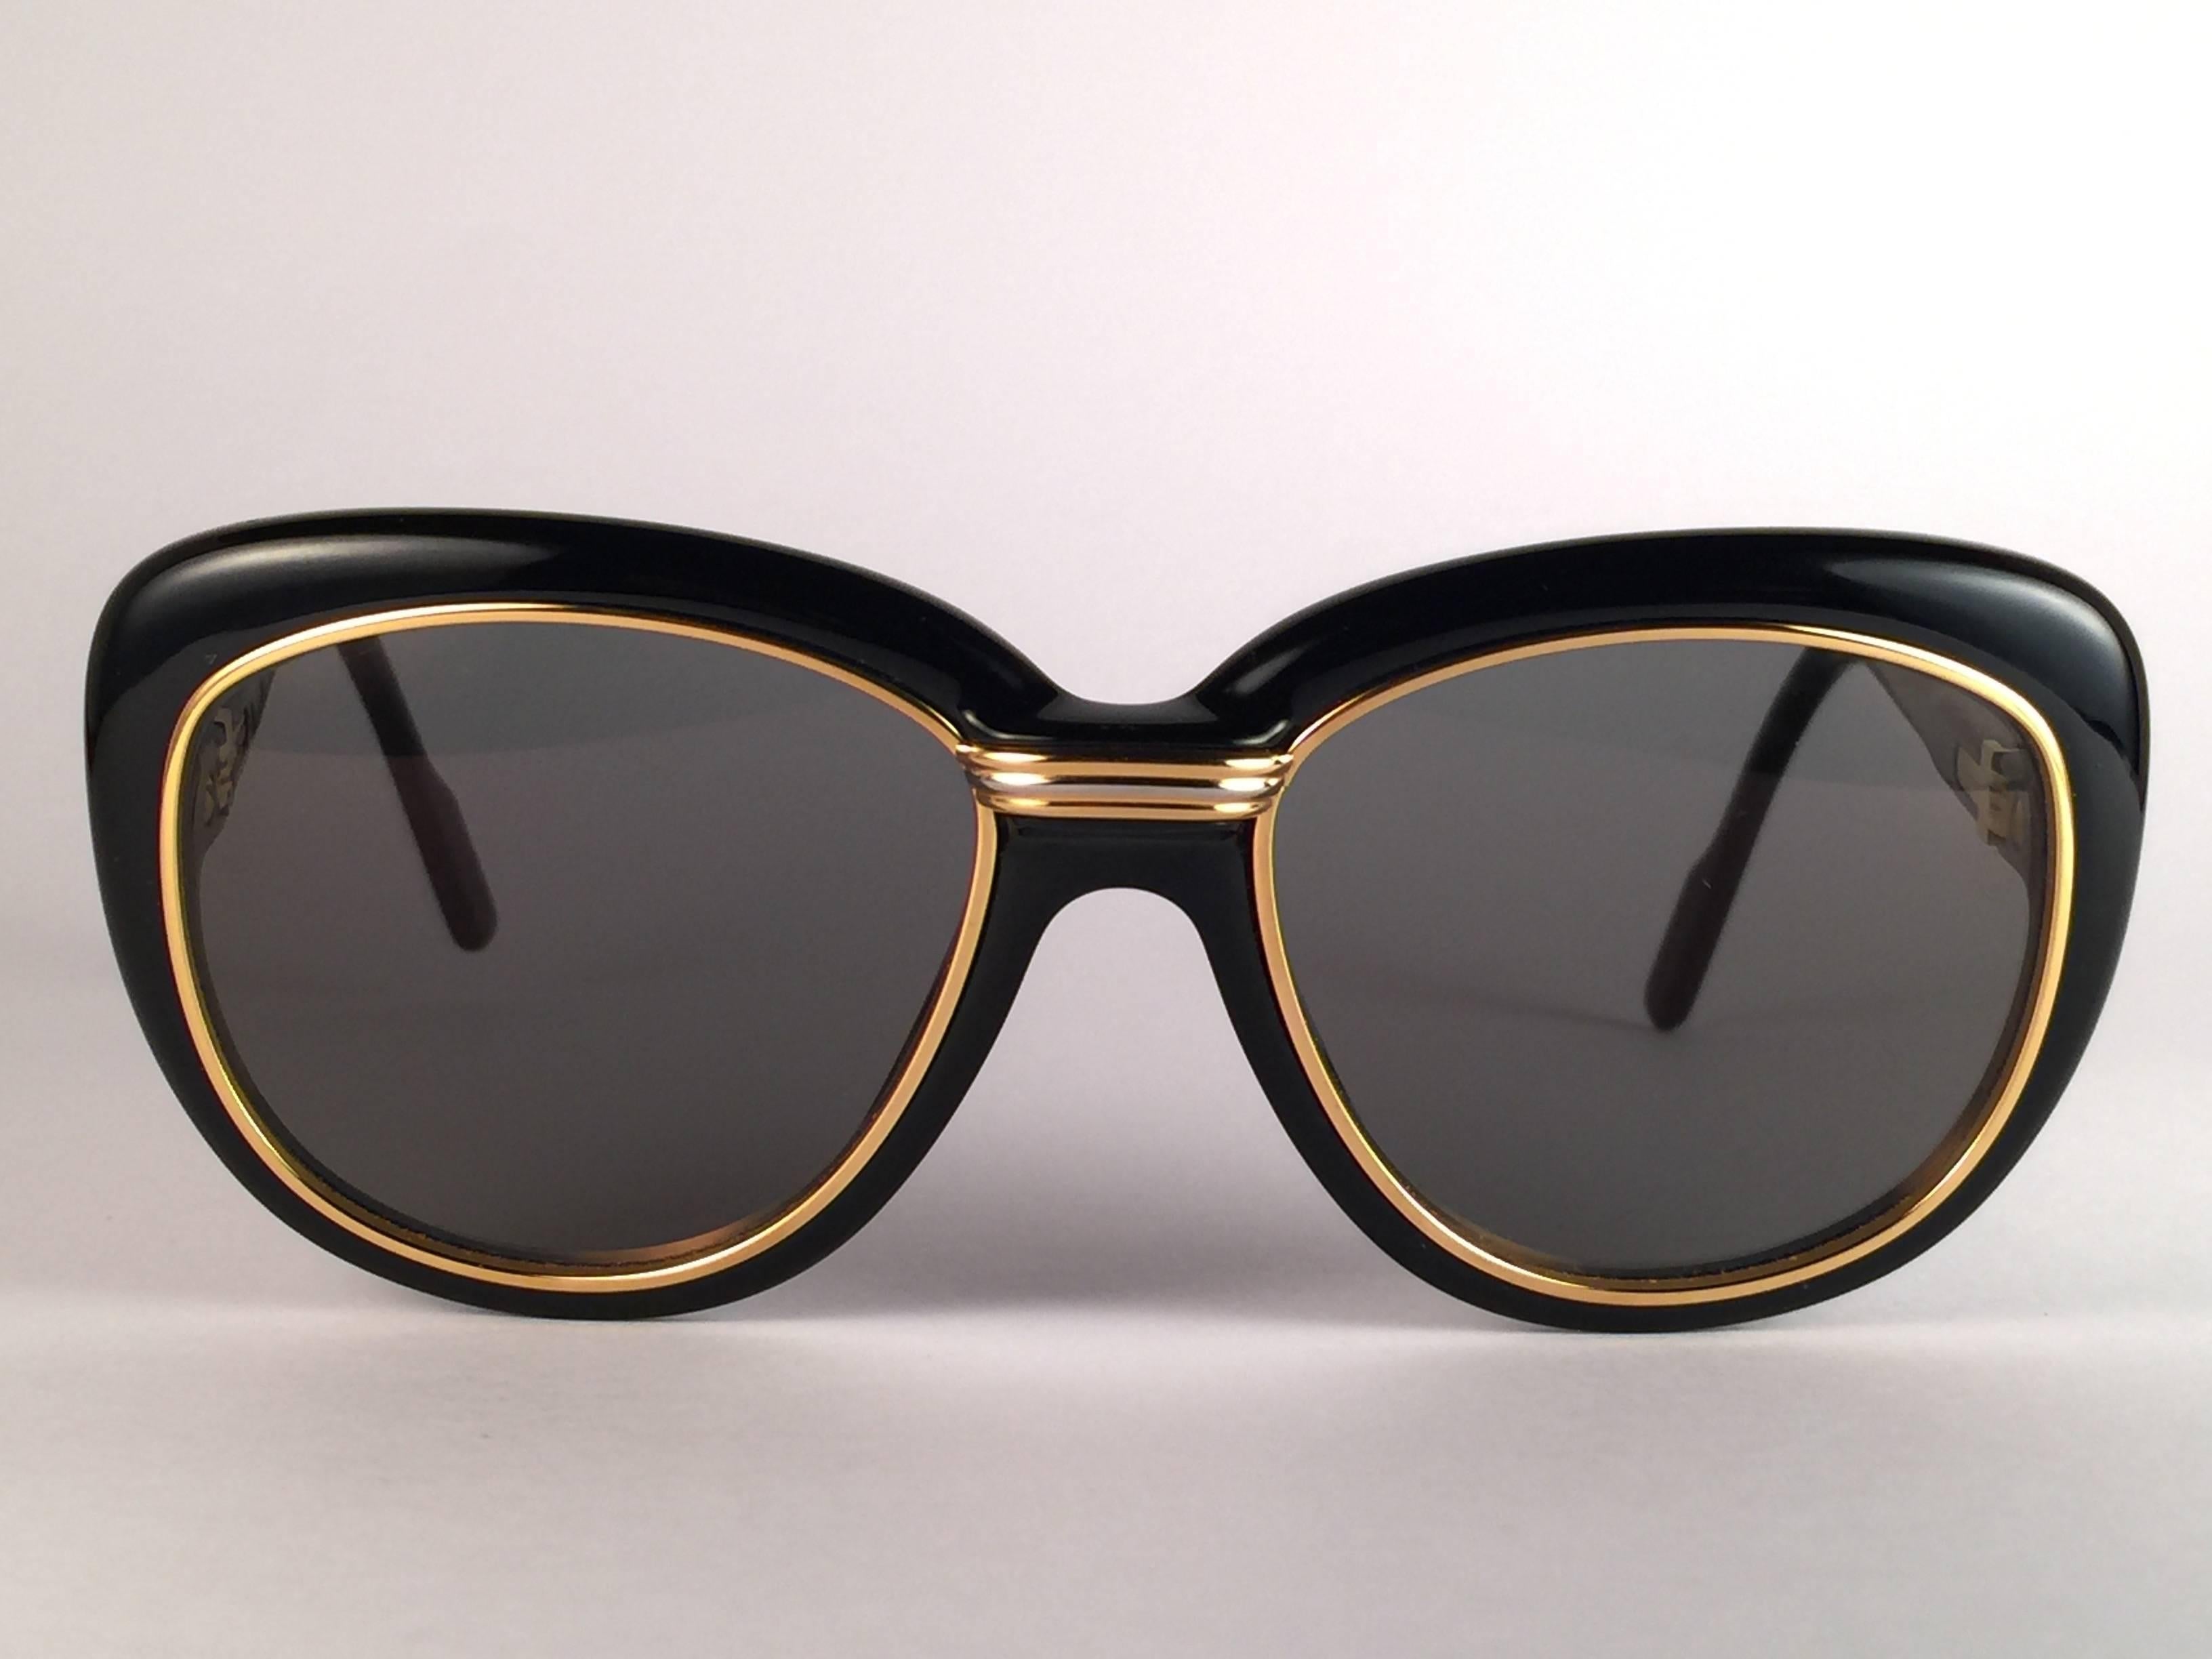 New Vintage Cartier Conquete 51mm Black Gold & Yellow Inserts France Sunglasses 2